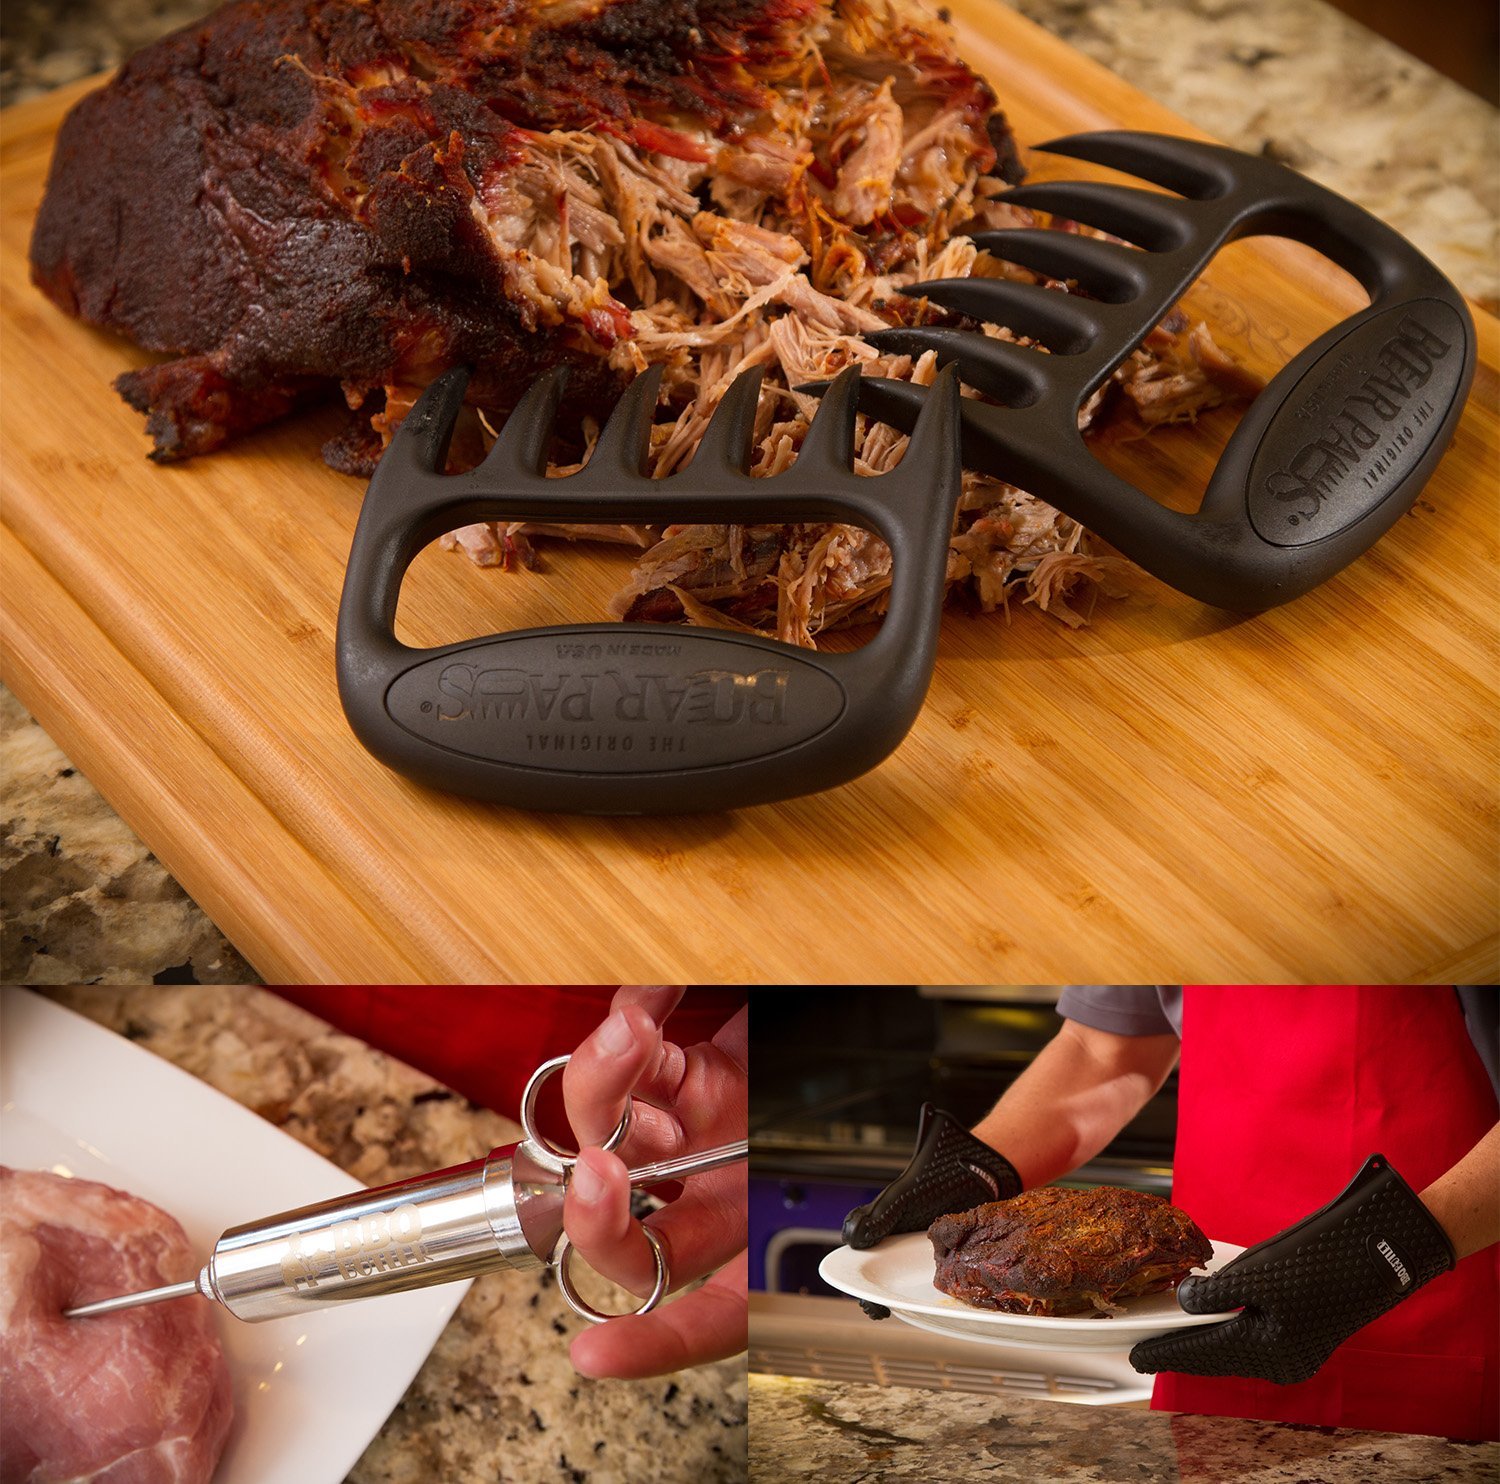 For the Wolverine wannabes, or anyone who's ever thought "there must be a better way to shred meat..."  Also contains a marinade injector and heat-resistant silicone gloves.   Get it <a href="https://amzn.to/2s4e0gT" target="_blank"><font color="red"><b>HERE</font></b></a>